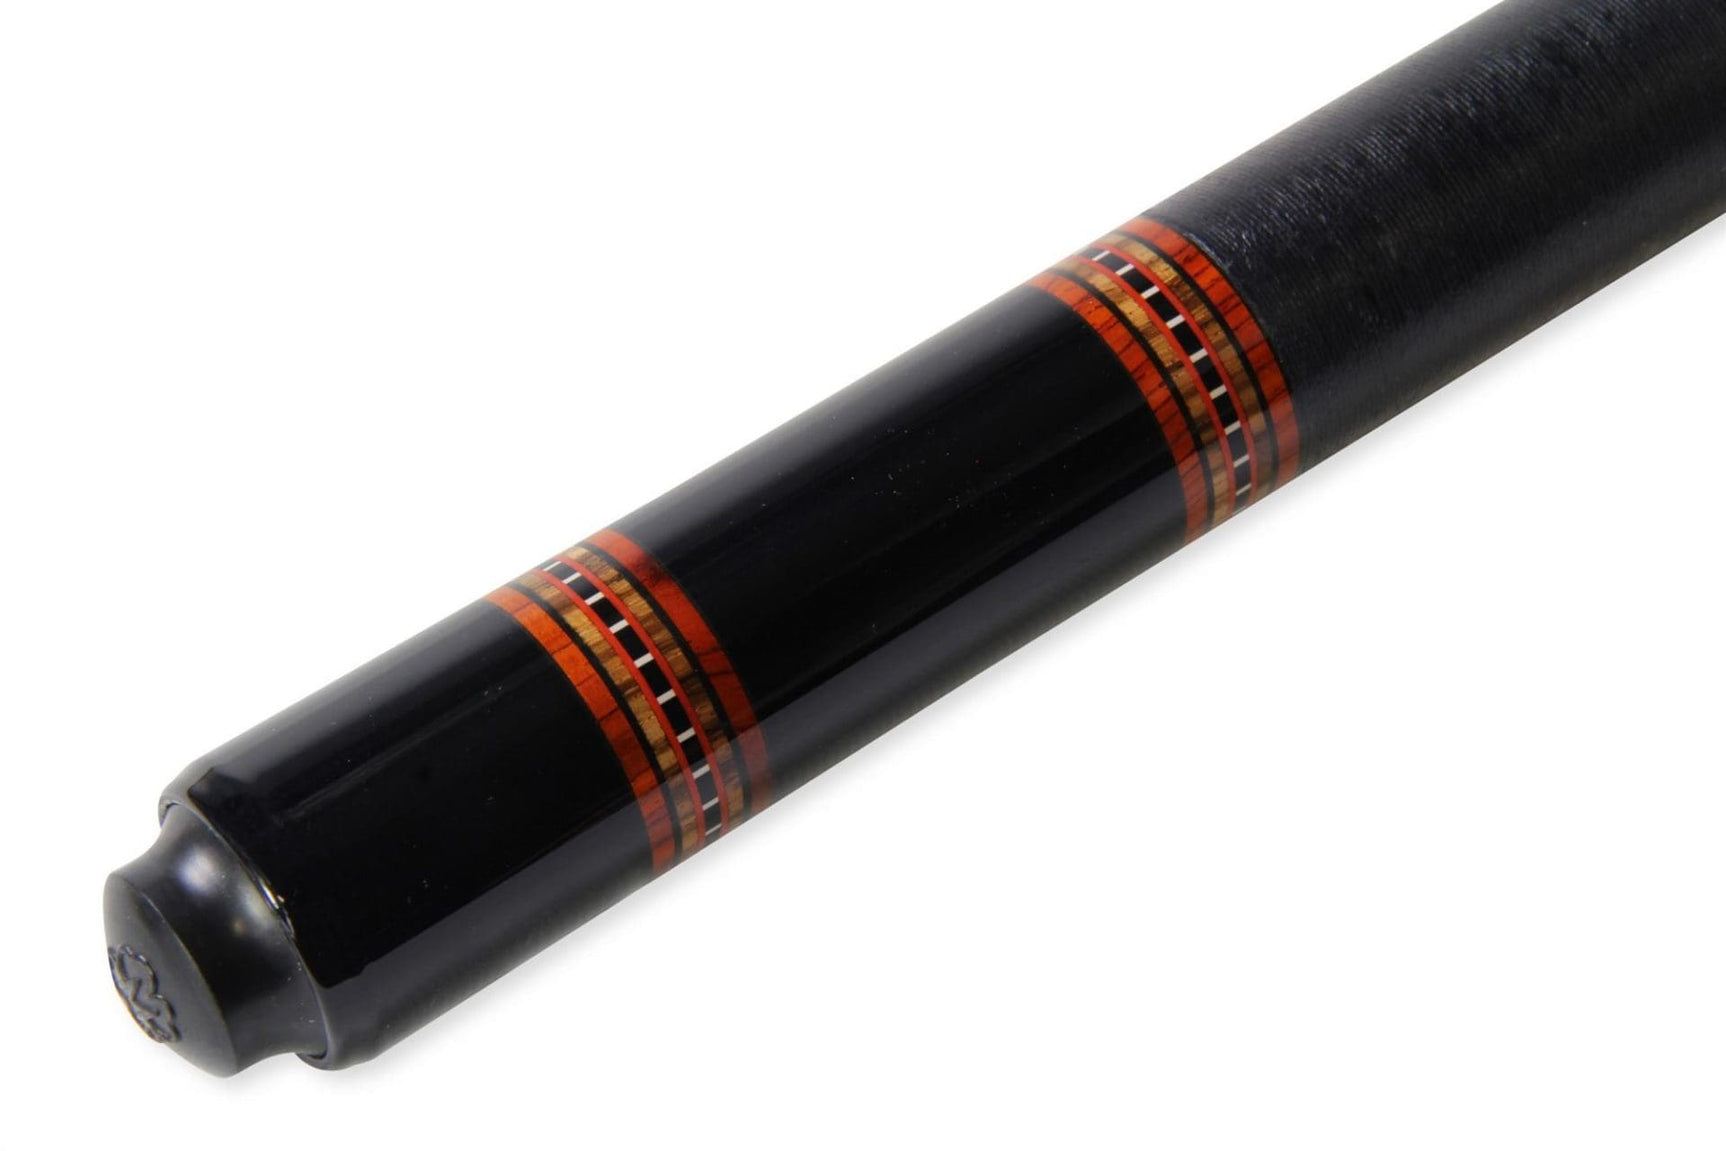 McDermott Hand Crafted G-Series American Pool Cue 13mm Tip – G225